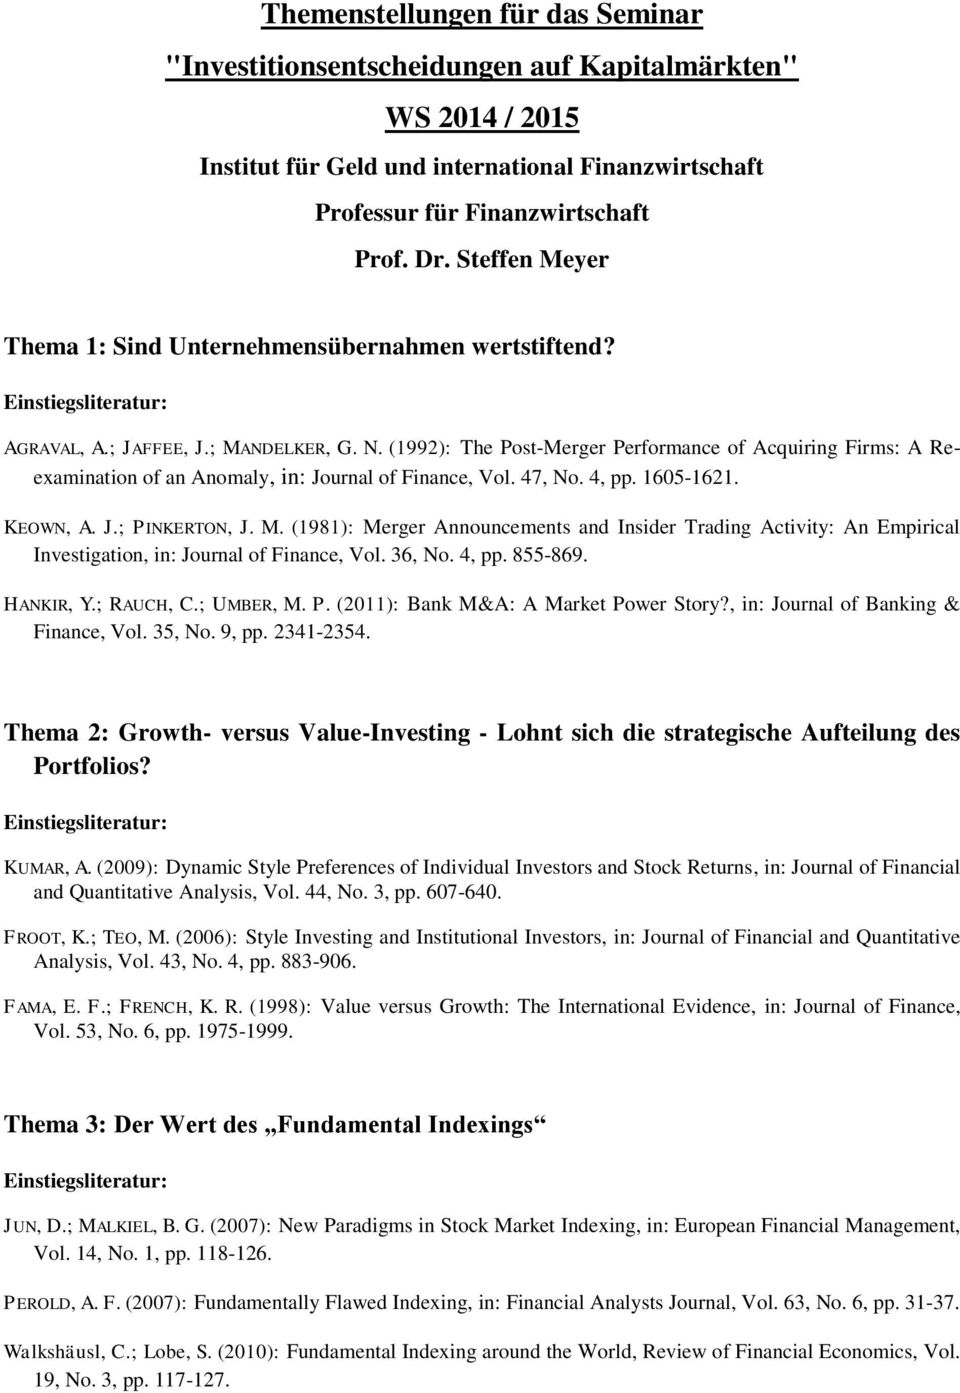 47, No. 4, pp. 1605-1621. KEOWN, A. J.; PINKERTON, J. M. (1981): Merger Announcements and Insider Trading Activity: An Empirical Investigation, in: Journal of Finance, Vol. 36, No. 4, pp. 855-869.